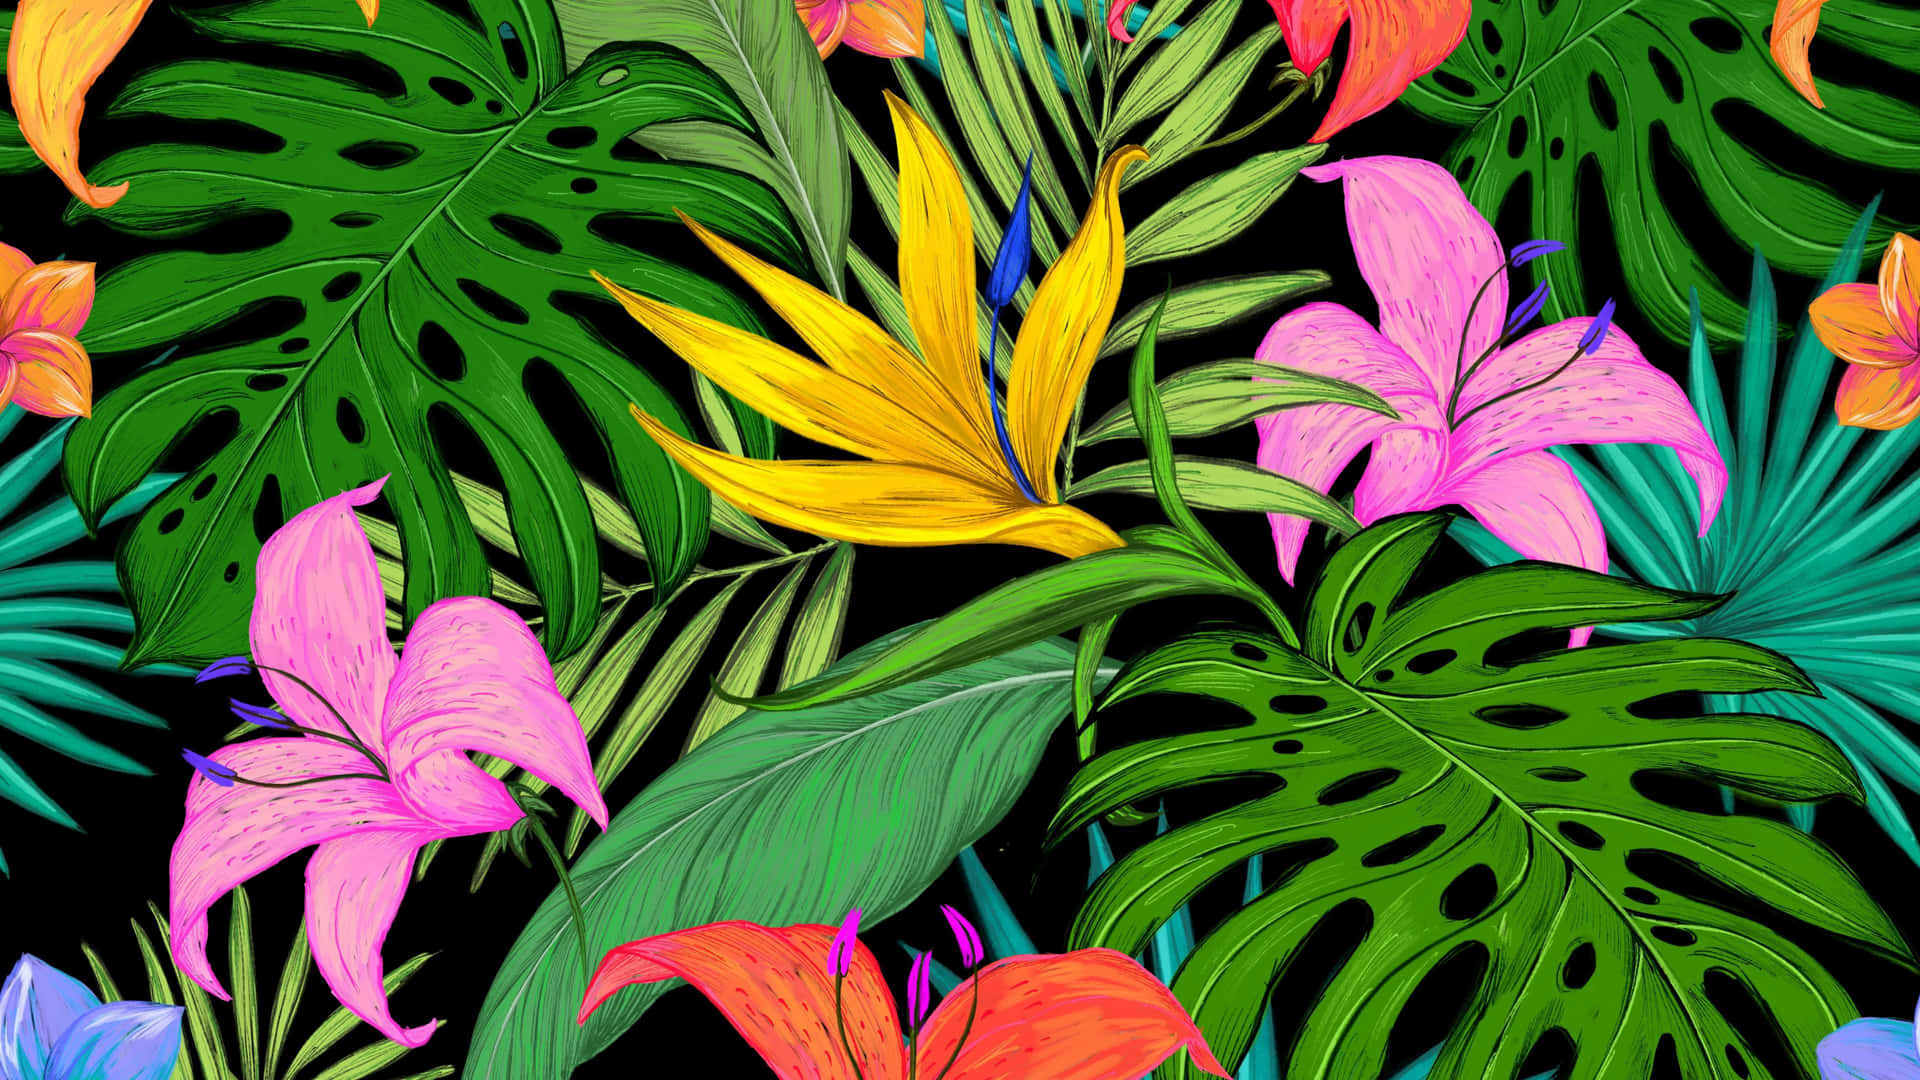 [100+] Aesthetic Tropical Wallpapers | Wallpapers.com